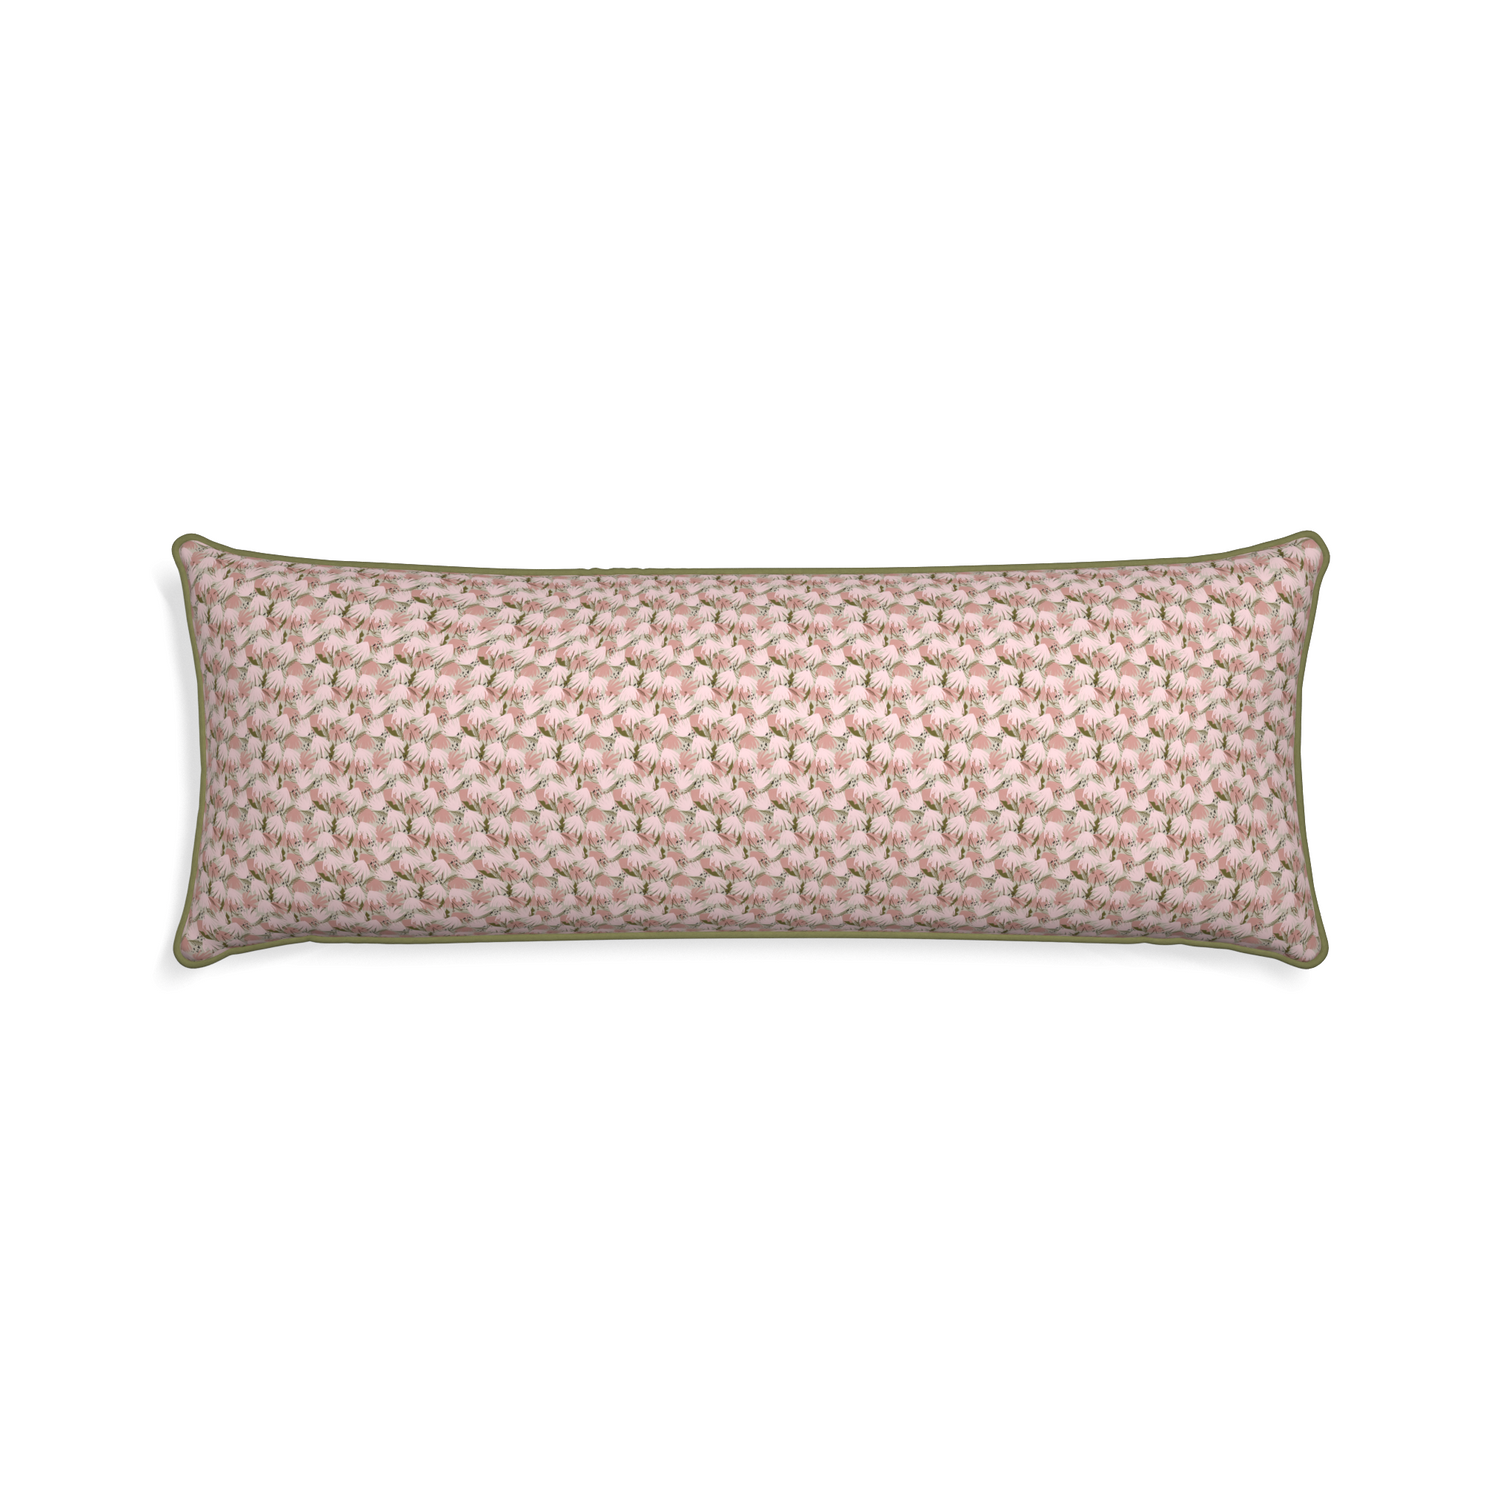 Xl-lumbar eden pink custom pink floralpillow with moss piping on white background